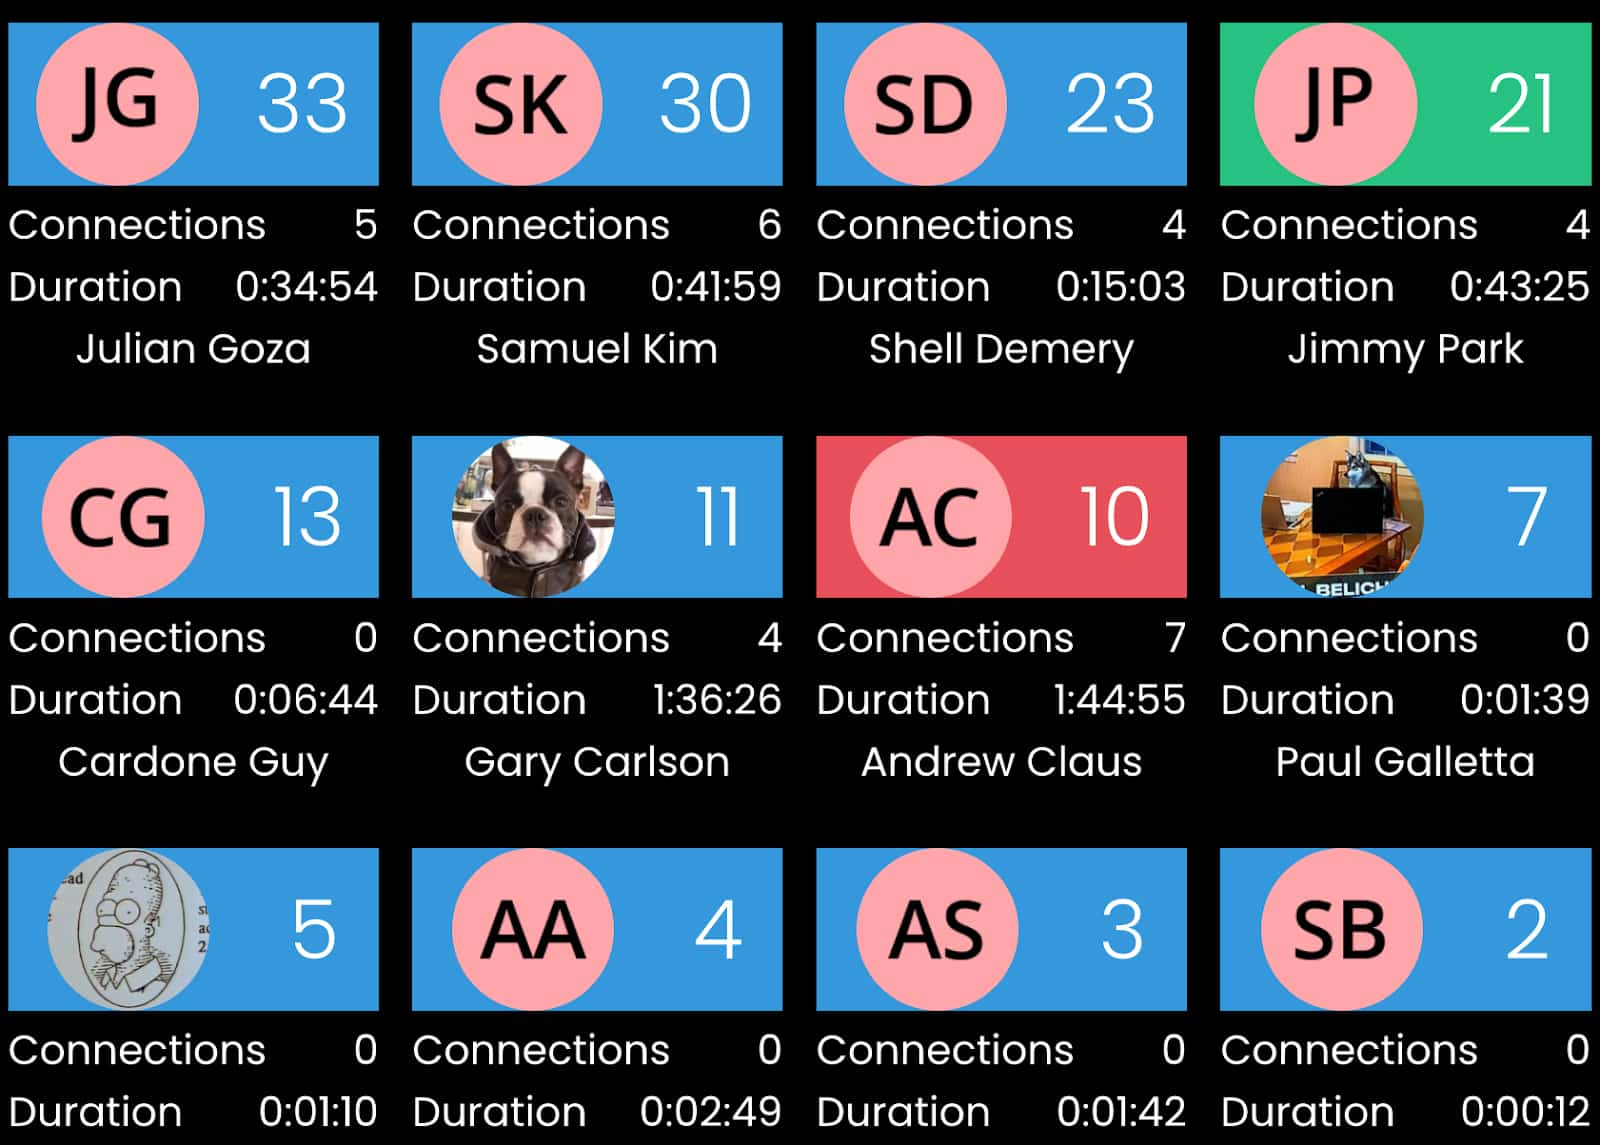 The sales leaderboard in Kixie, showing the initials of agents and their corresponding number of connections.